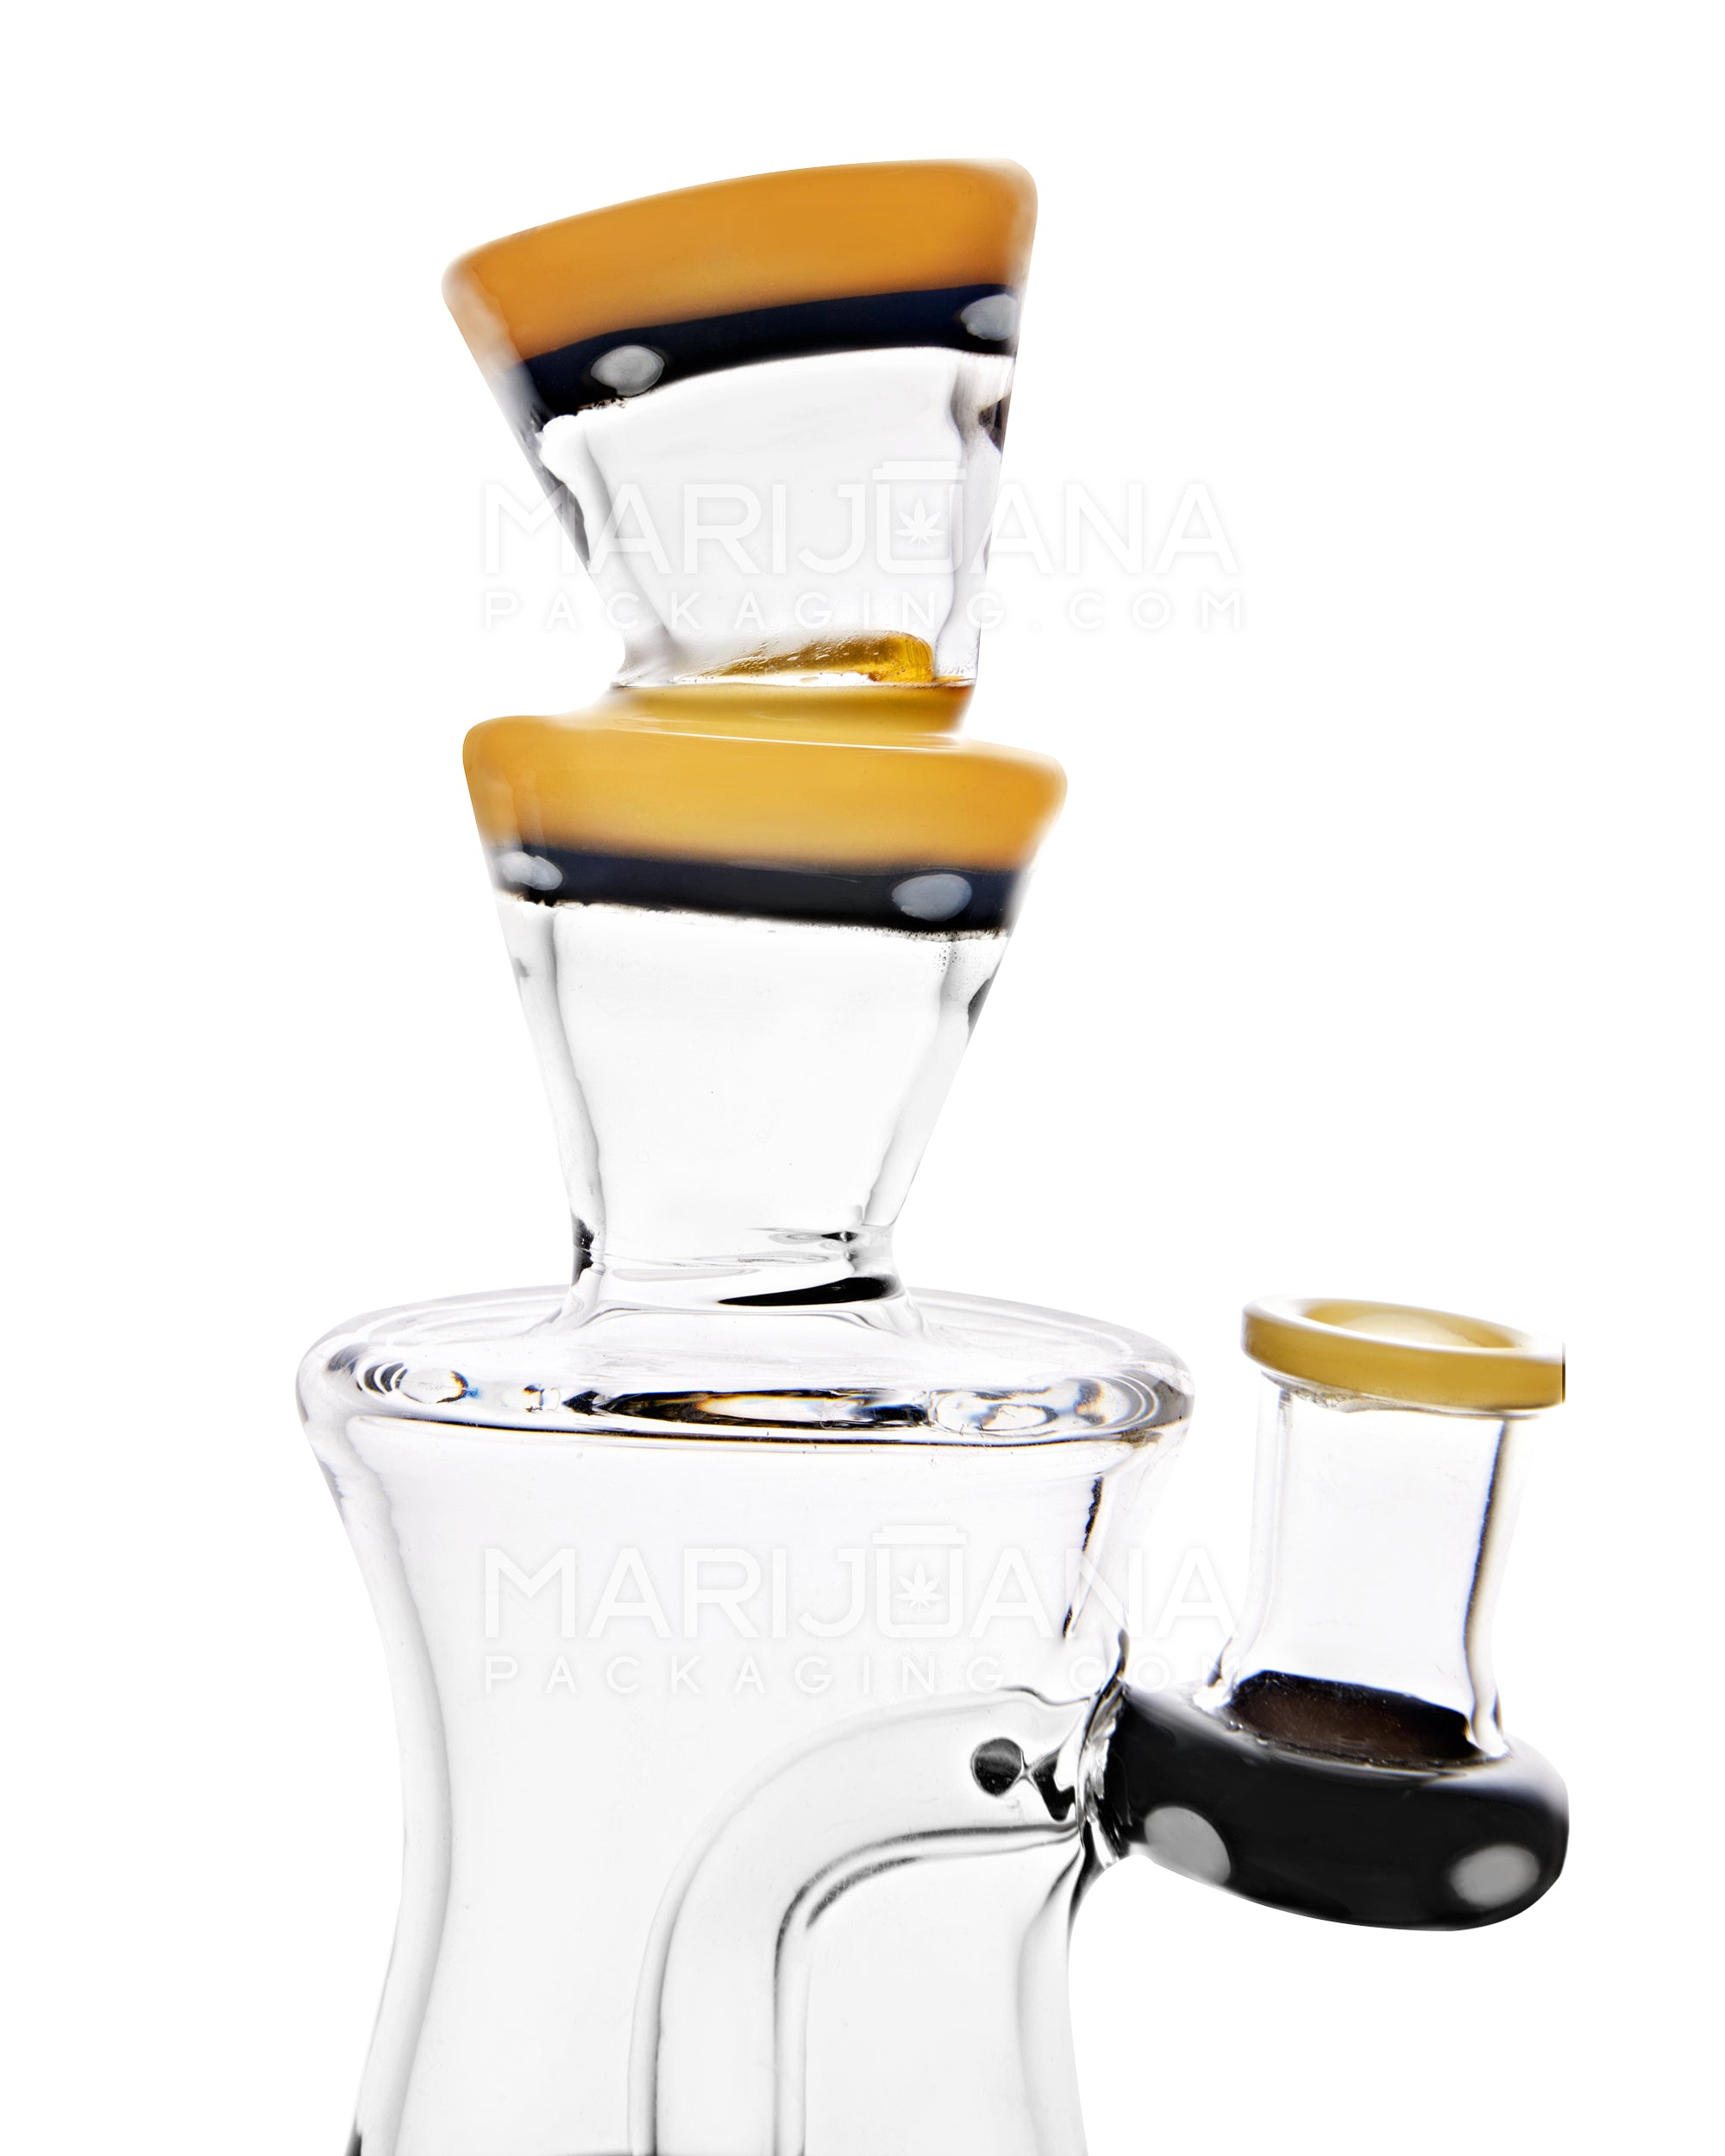 USA Glass | Angled Neck Showerhead Perc Kickback Hourglass Water Pipe w/ Indented Bowl | 7.5in Tall - 14mm Bowl - Yellow